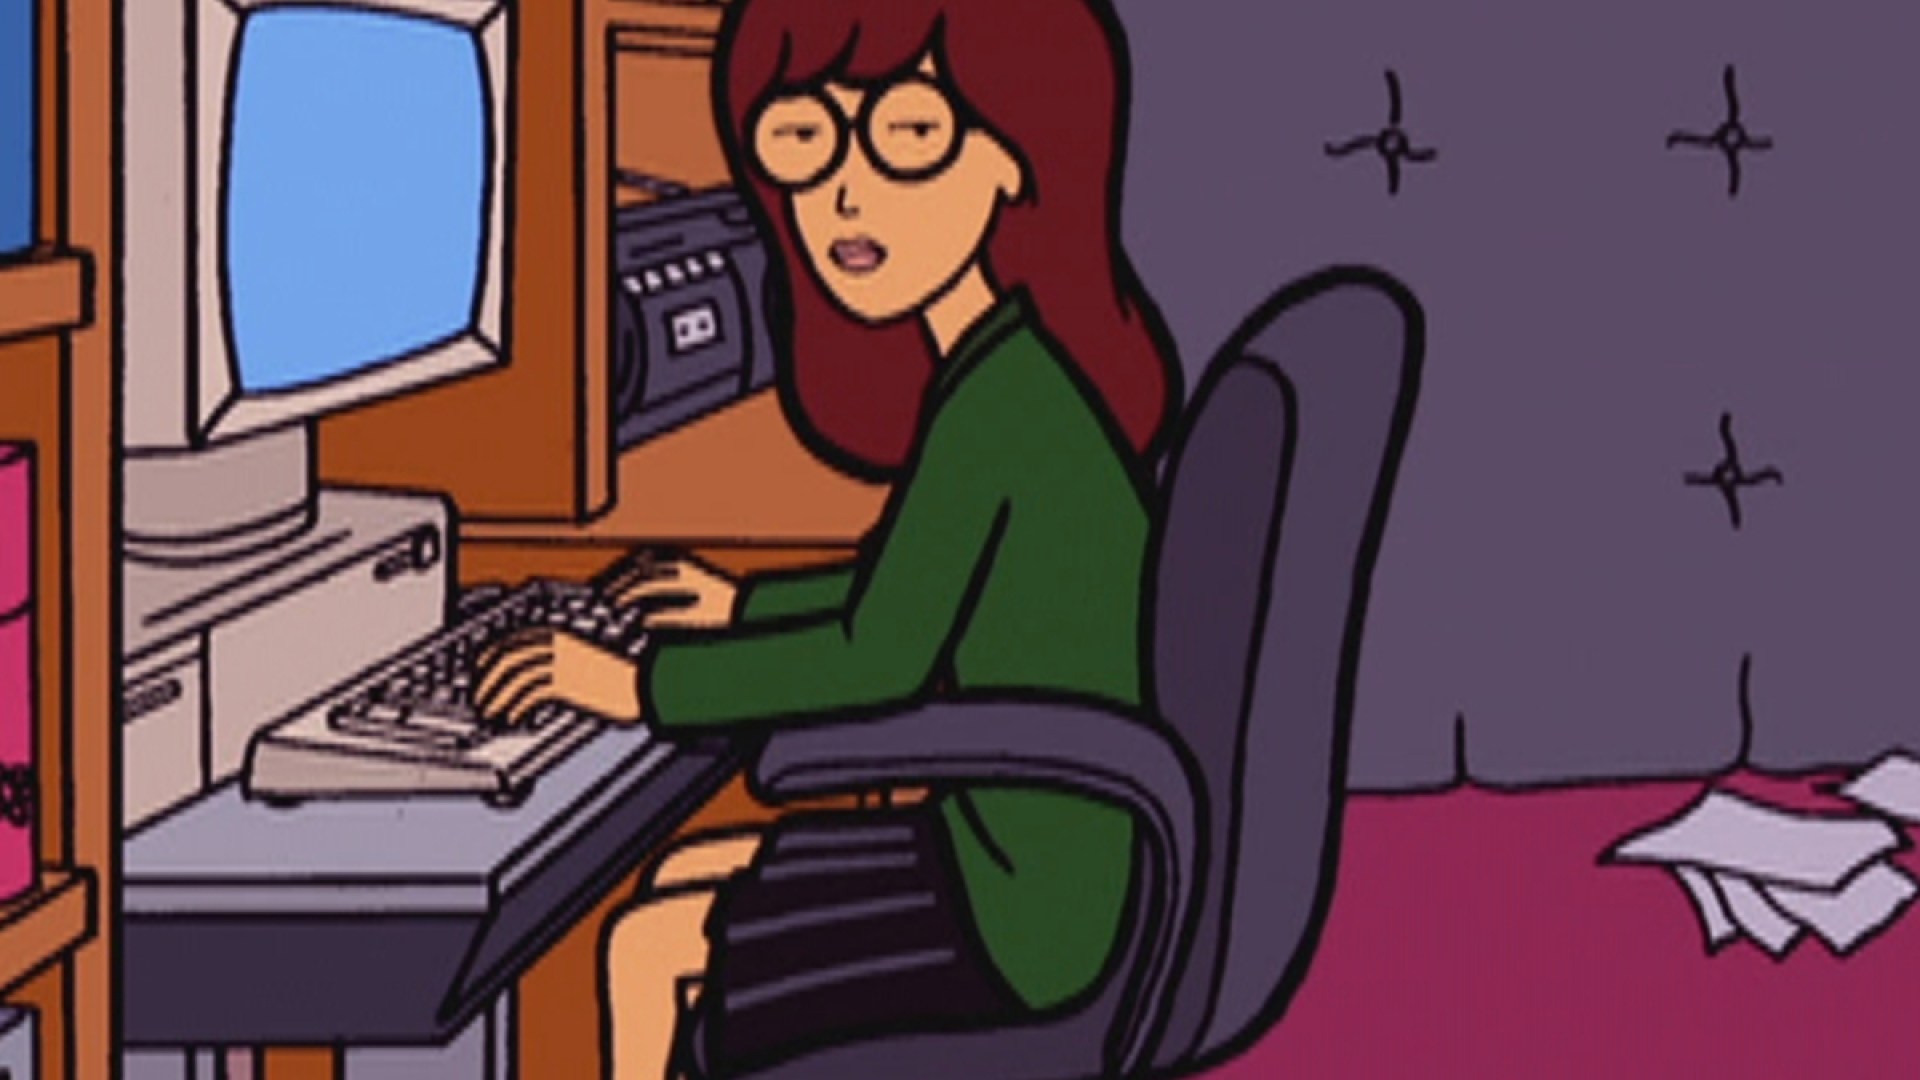 Daria using her computer and giving us peons a Look.